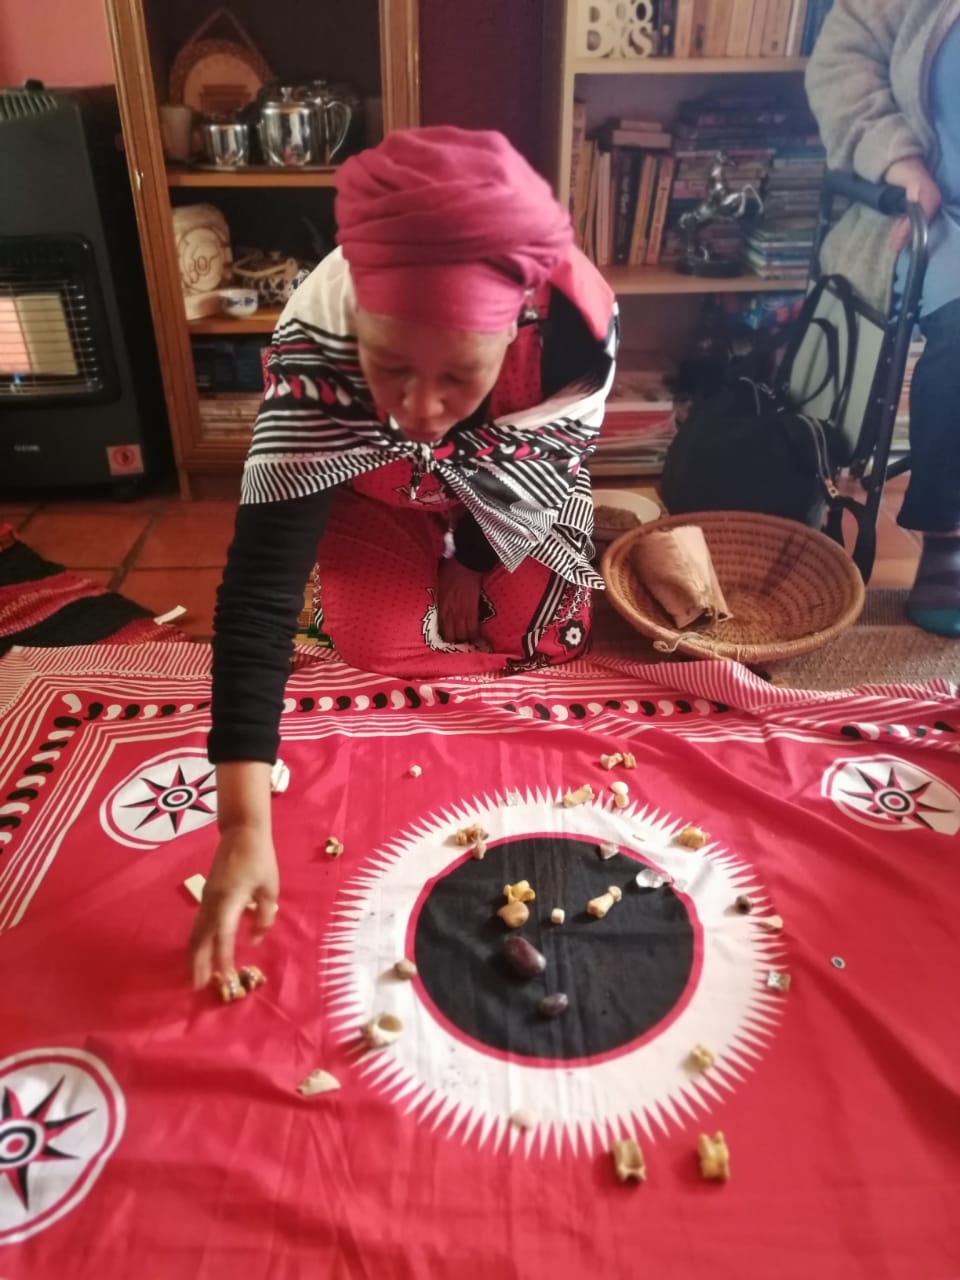 person reaching for small items on an elaborate red rug